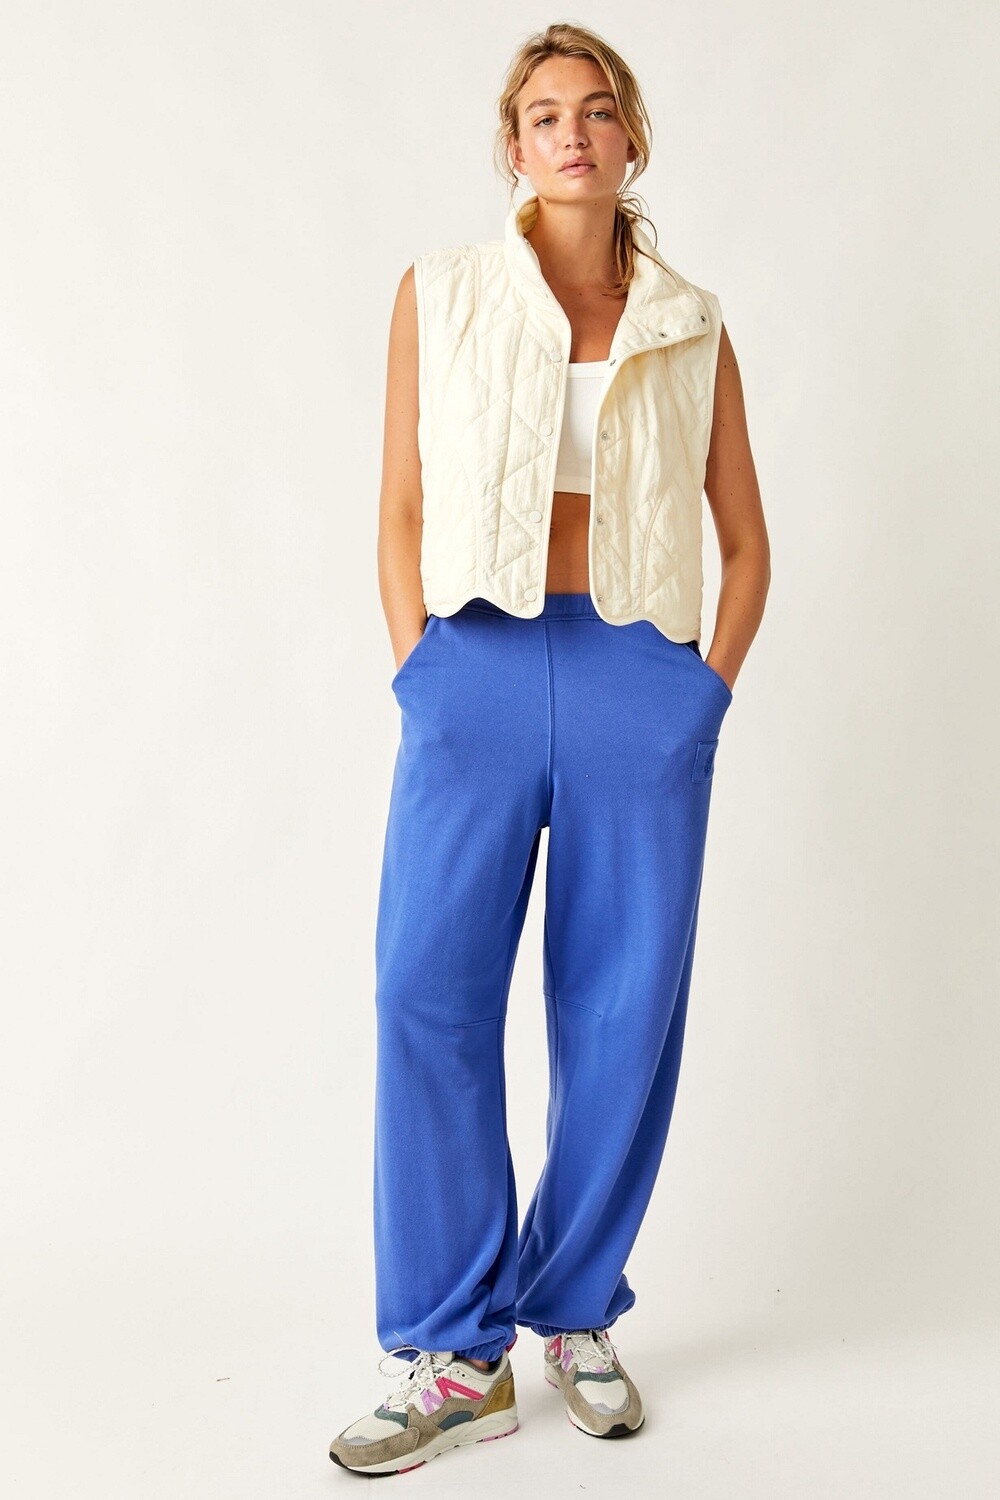 Warm Down Pant, Size: Extra Small